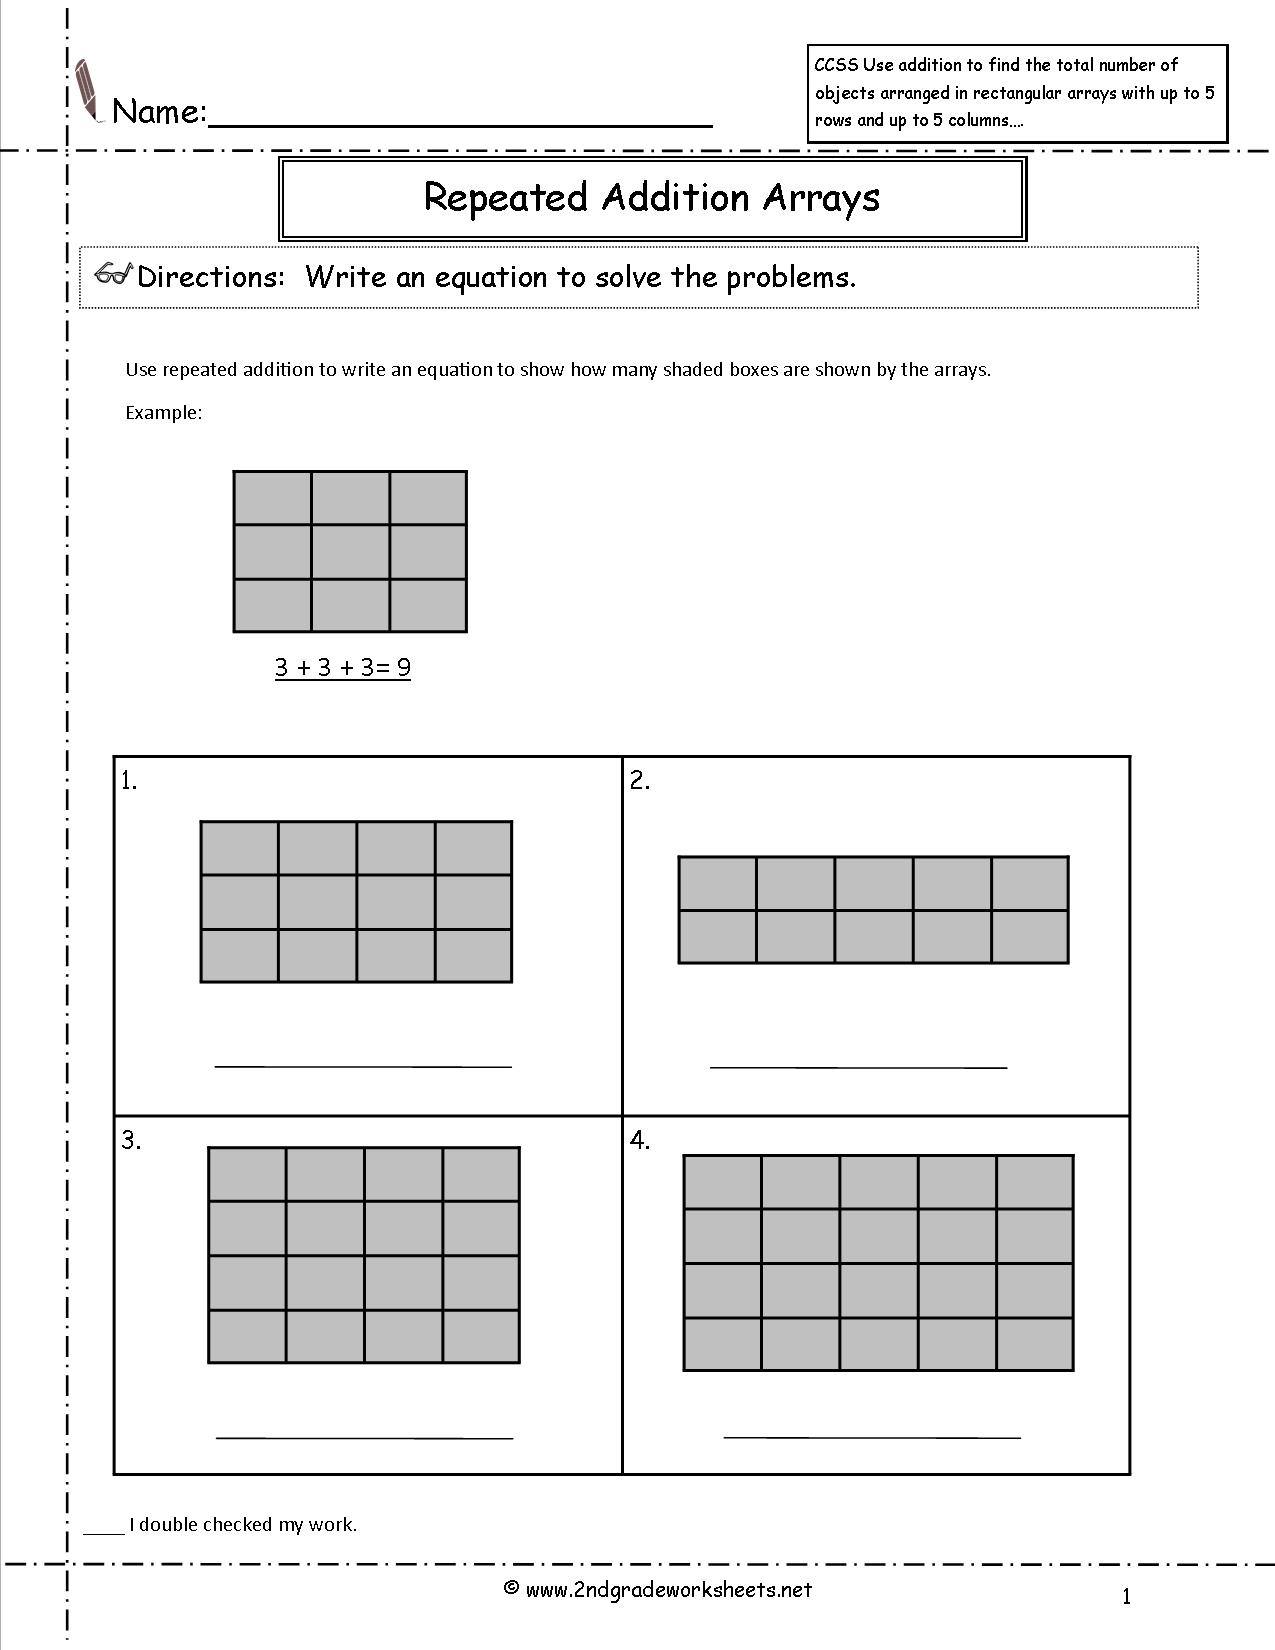 9-best-images-of-equal-groups-worksheets-division-as-repeated-subtraction-worksheet-division